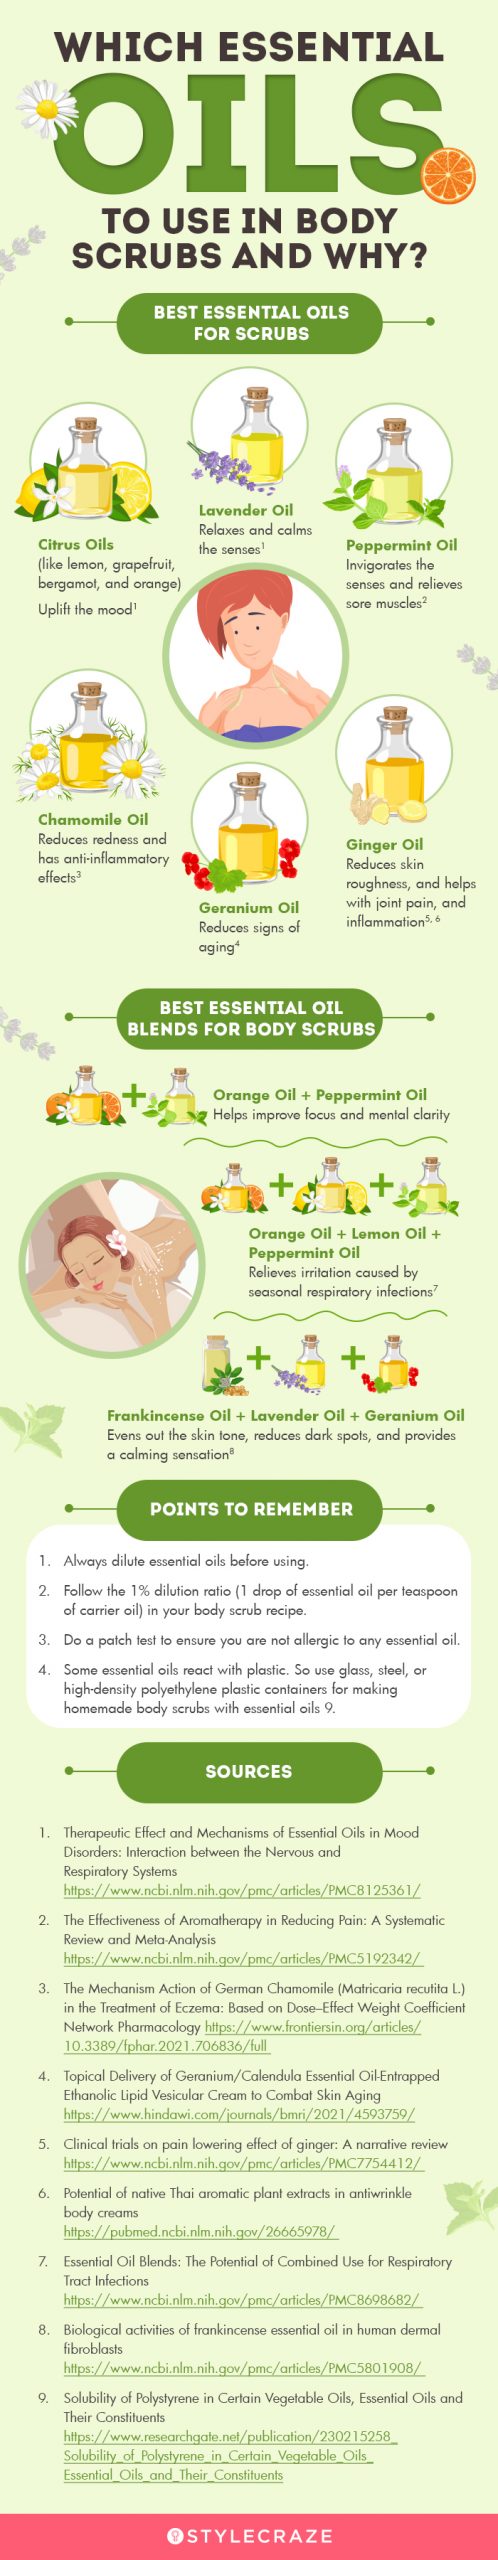 best essential oils for scrubs [infographic]